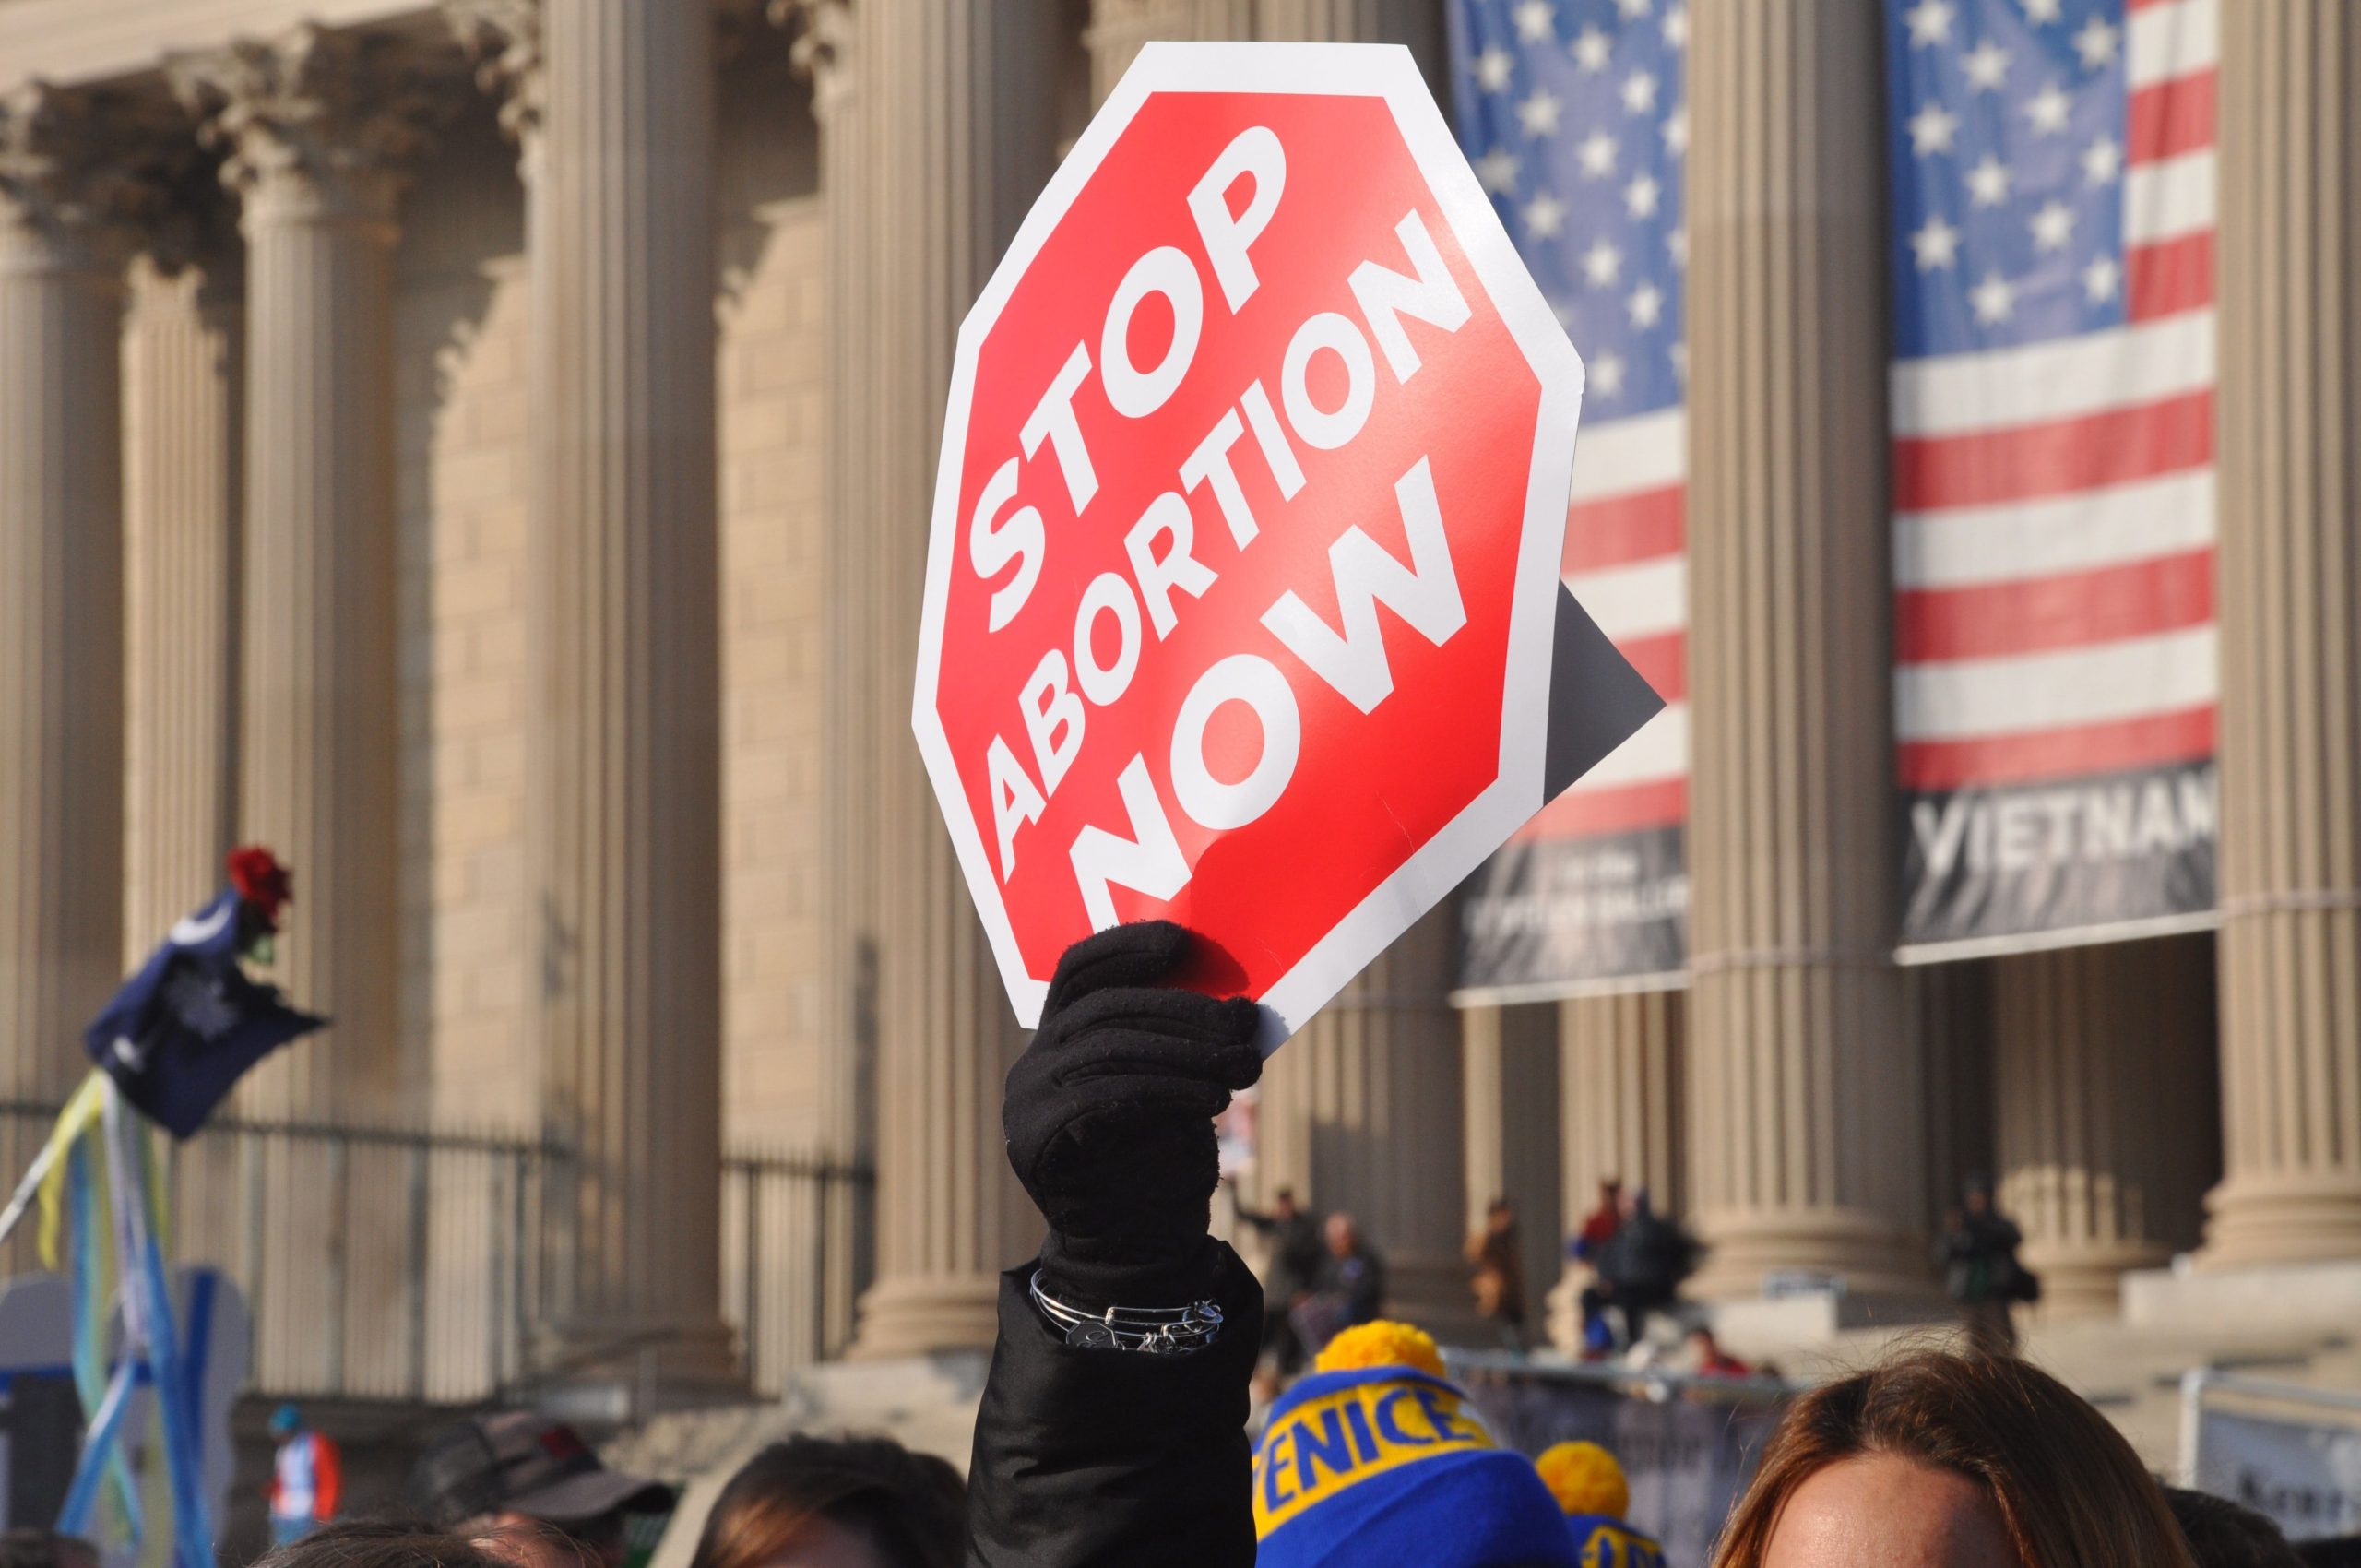 Why LGBTQ community is concerned about Roe v Wade overturning